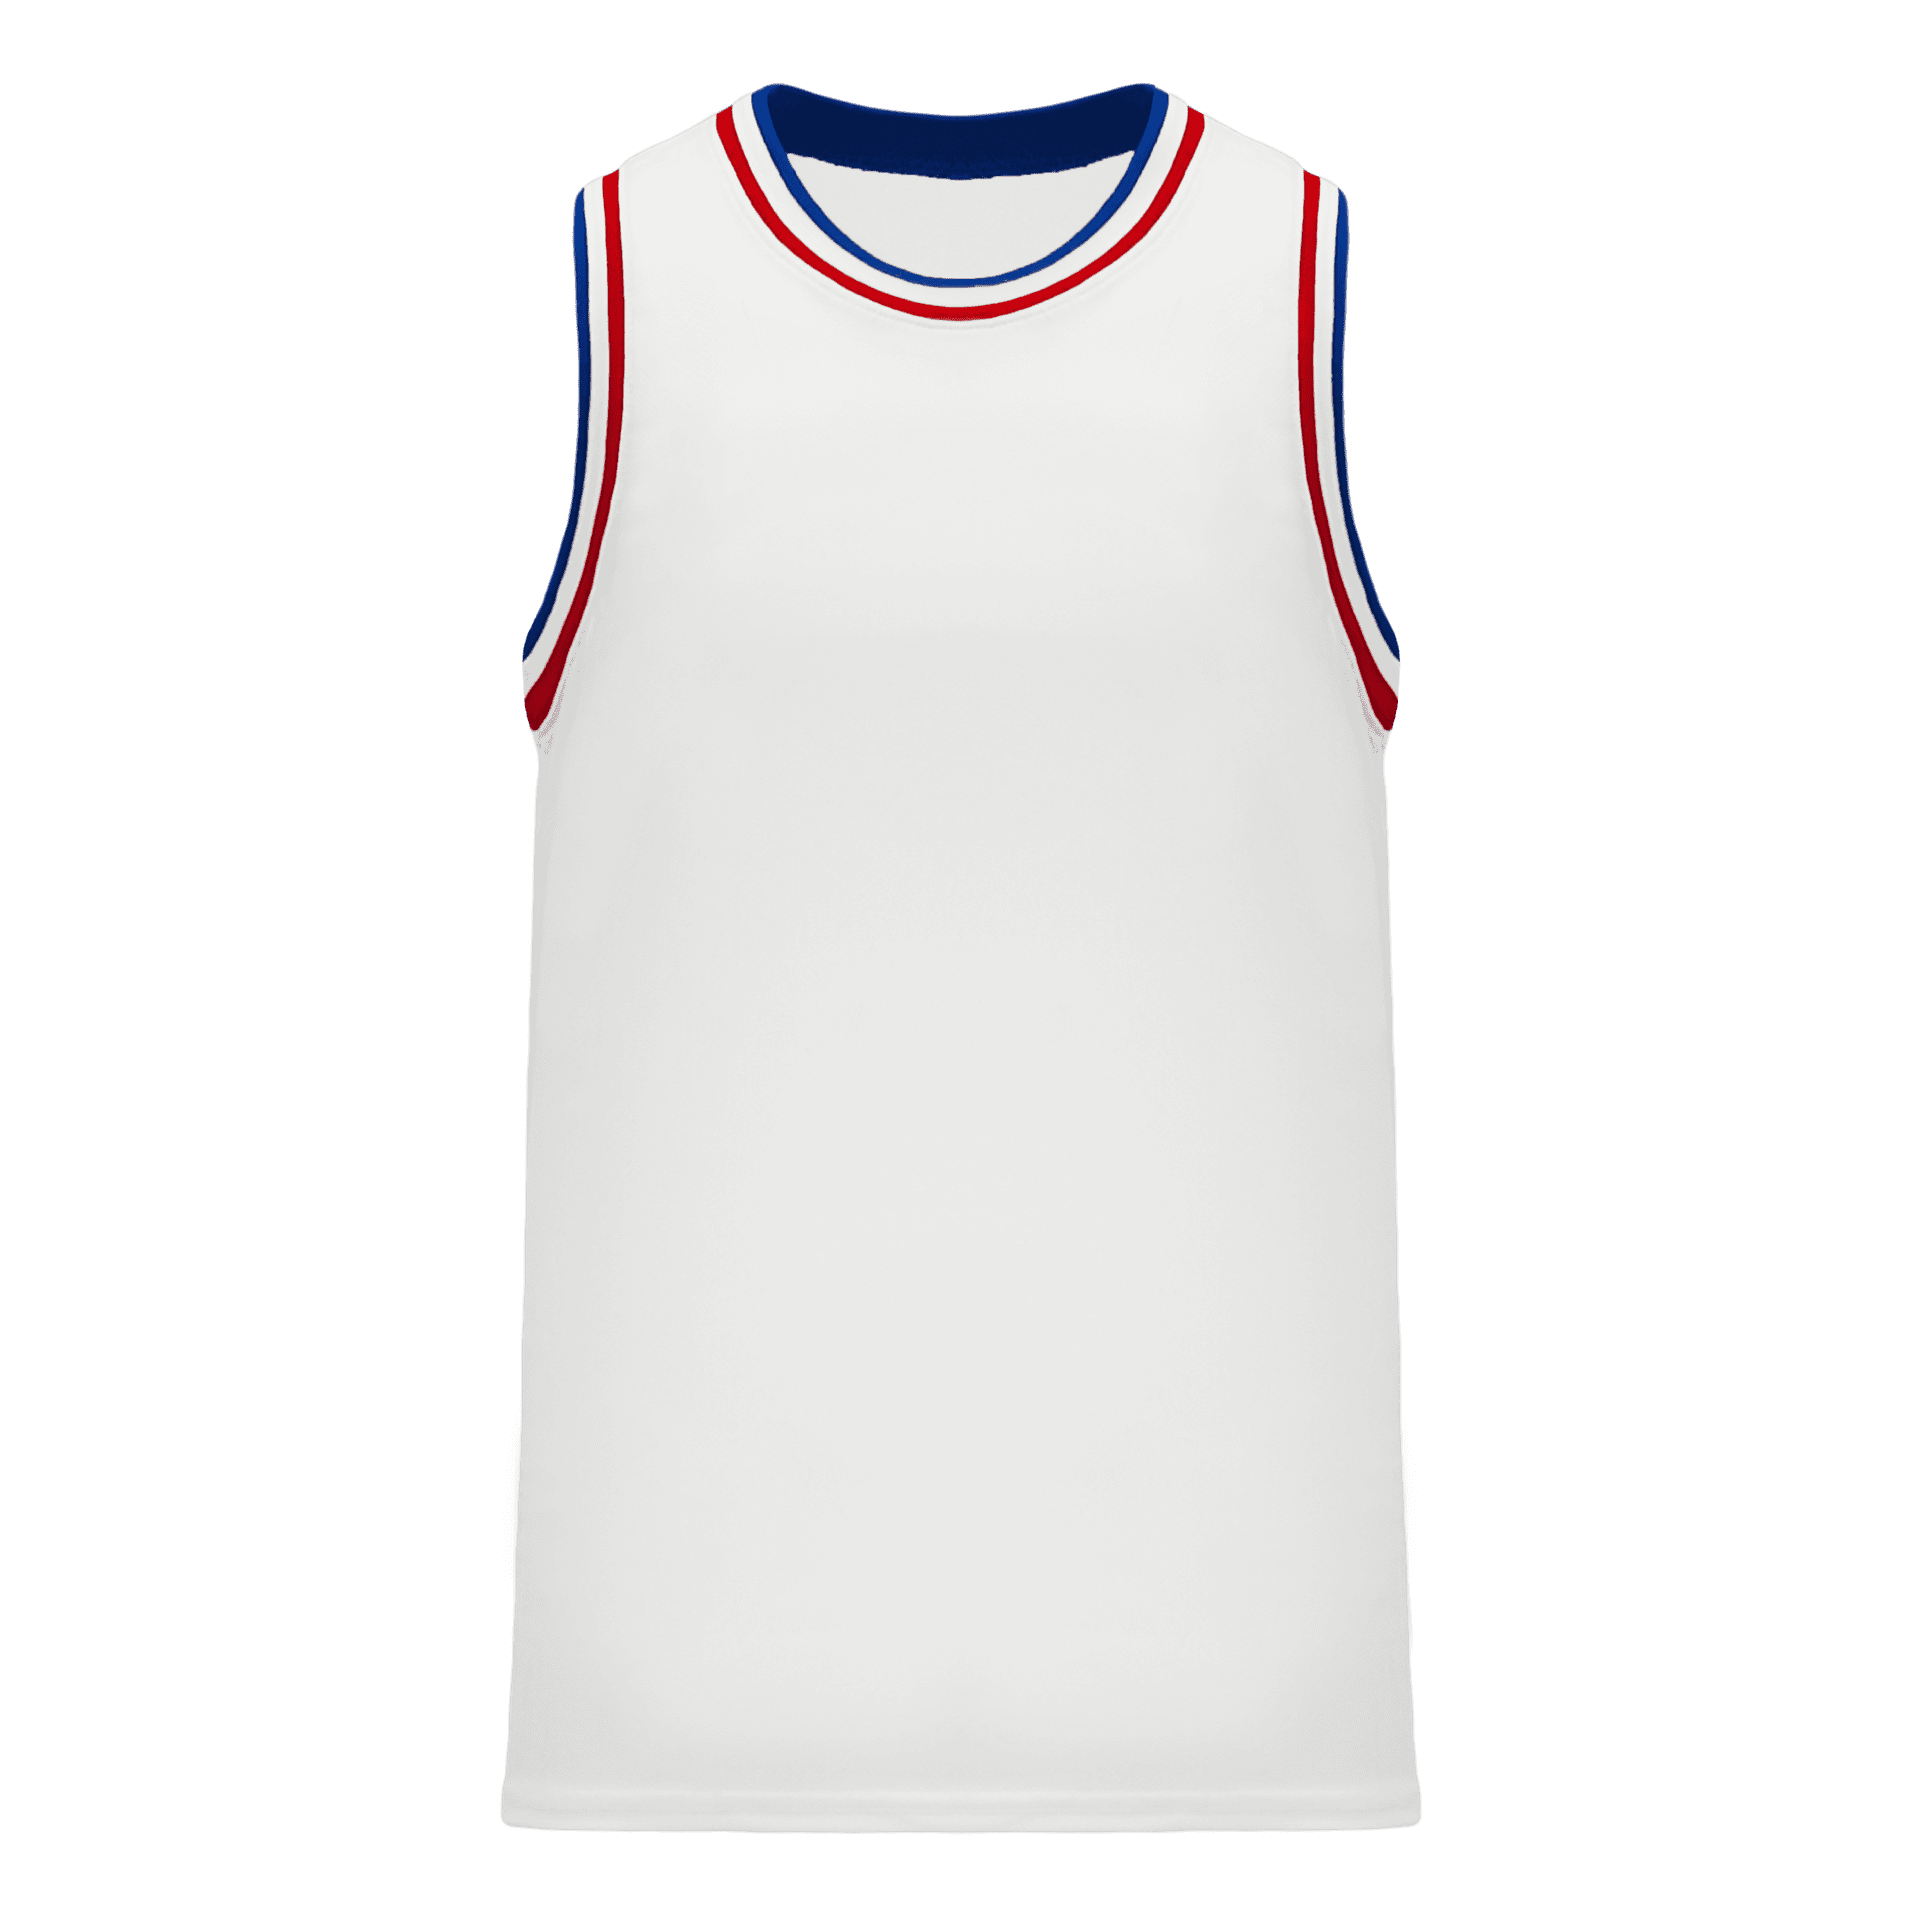 ATHLETIC KNIT PRO BASKETBALL JERSEY #B1710 White / Royal / Red